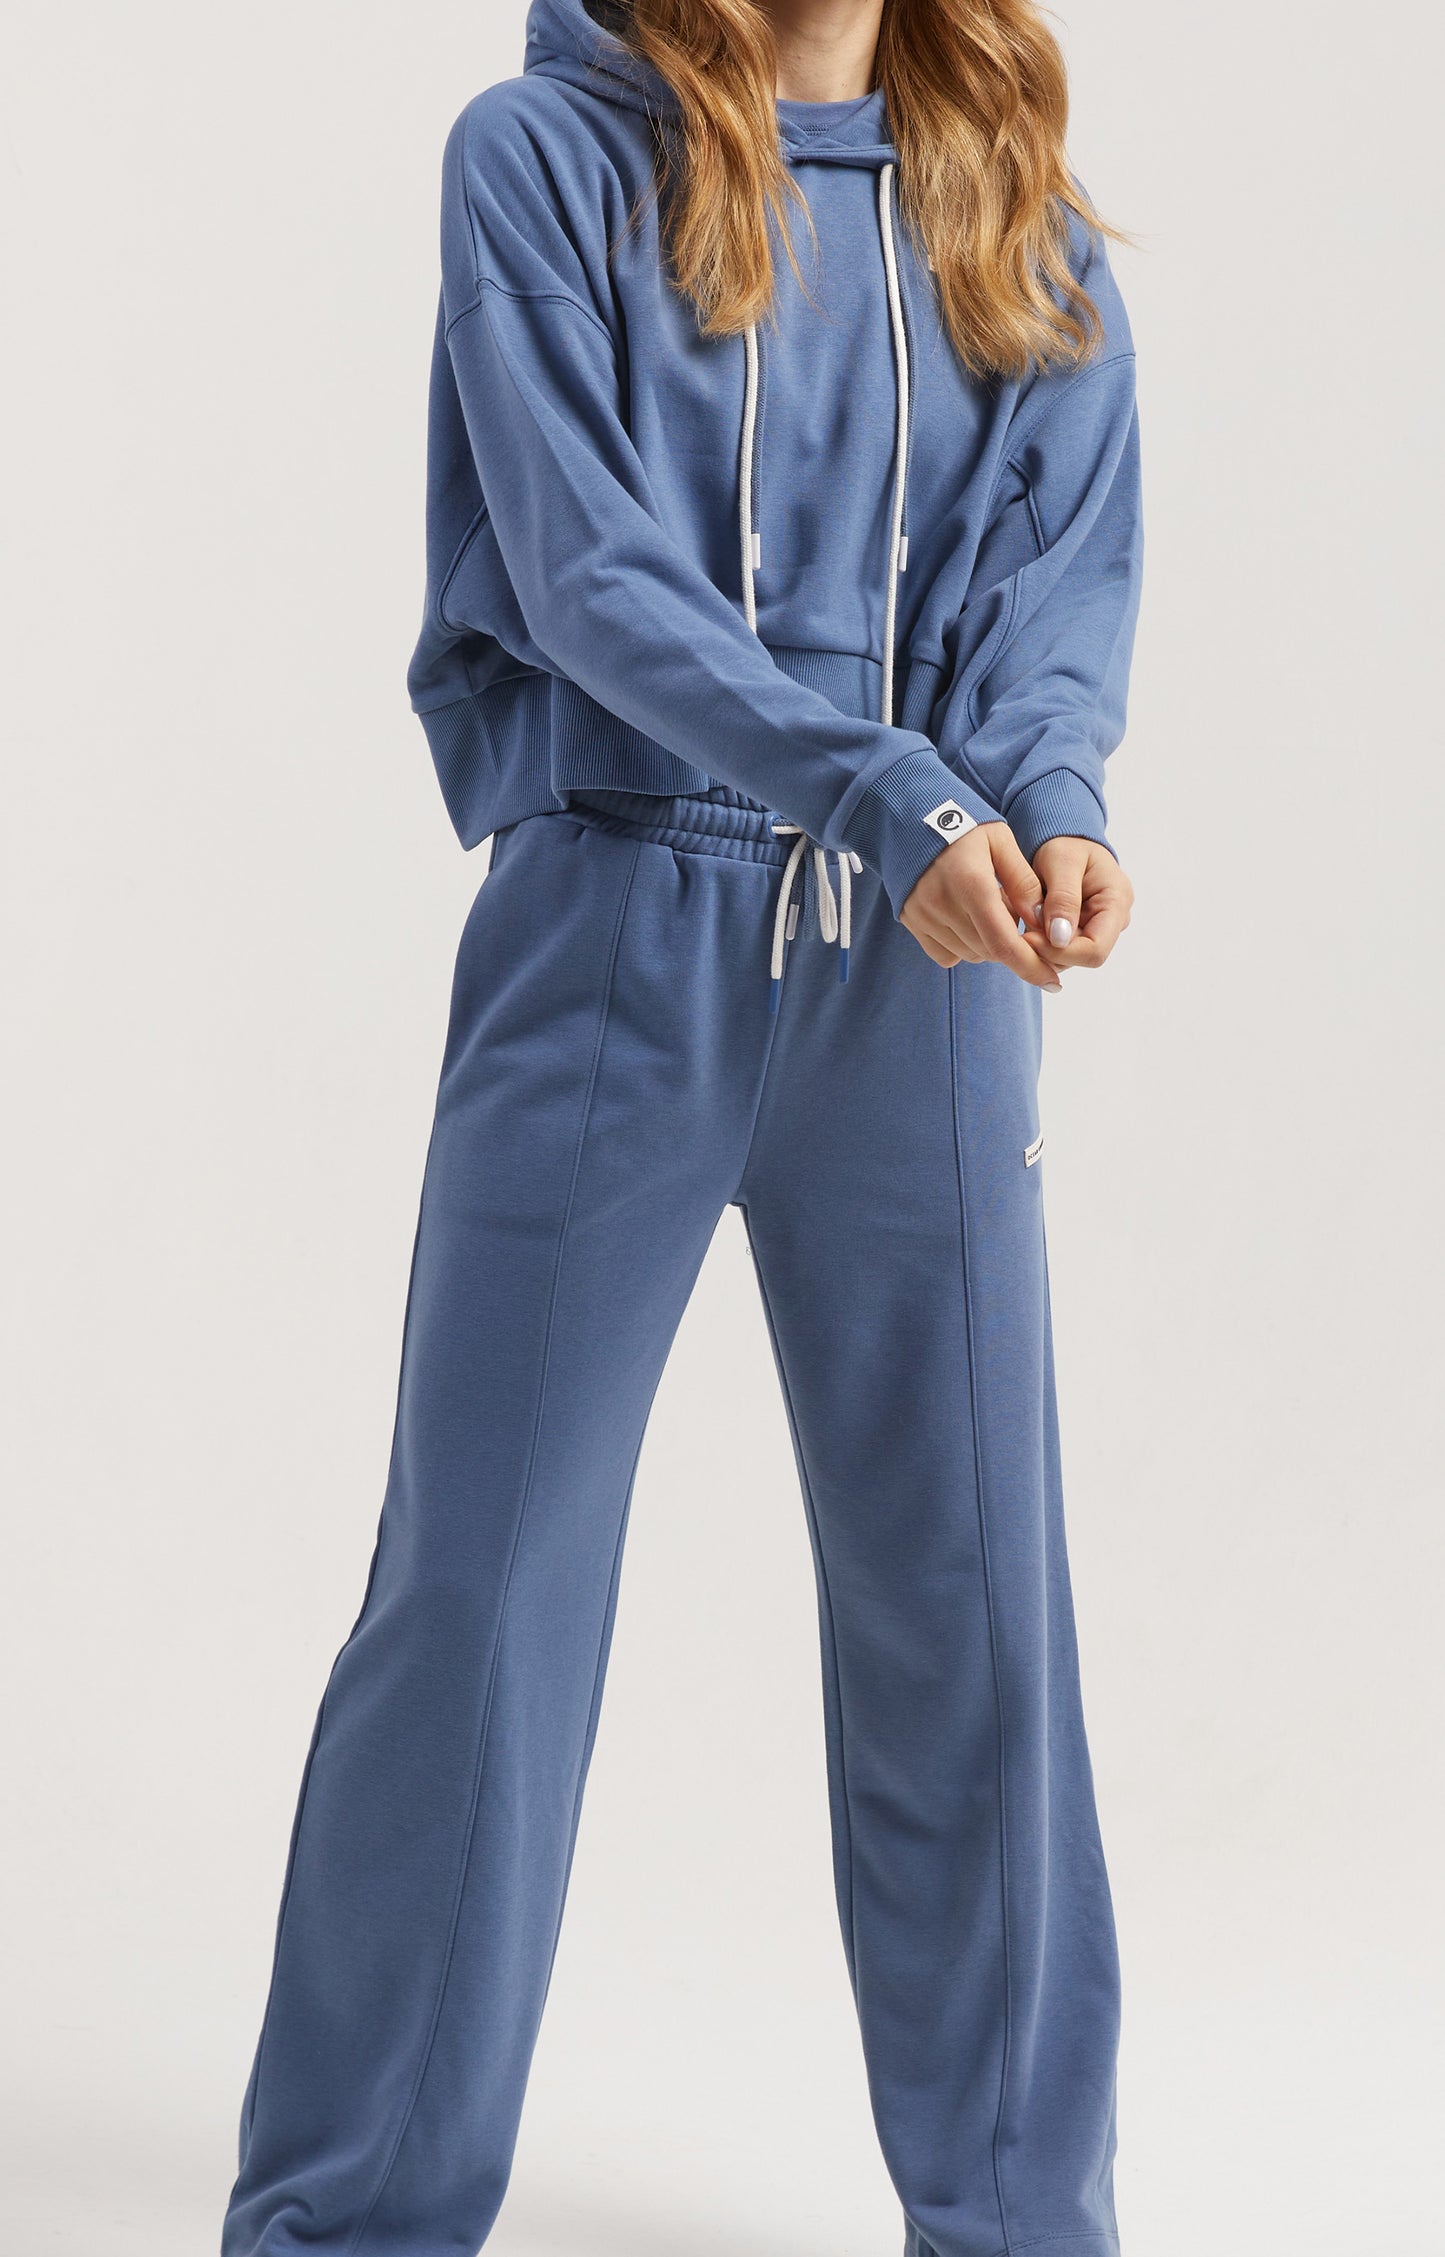 Maple Cropped Hoodie for Women- Moonlight Blue